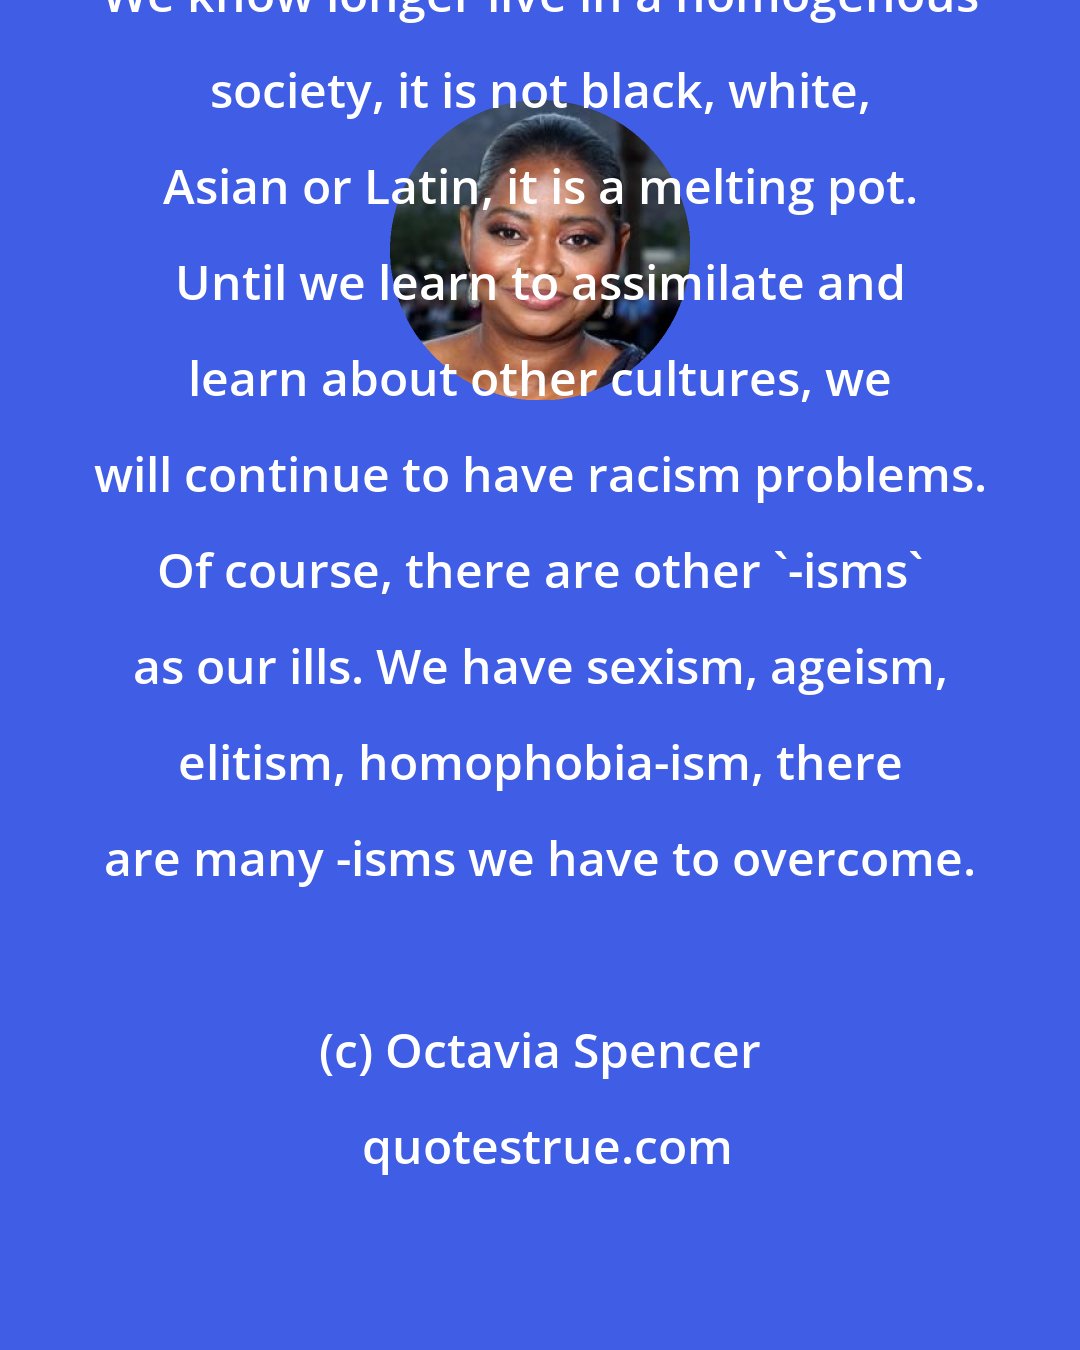 Octavia Spencer: We know longer live in a homogenous society, it is not black, white, Asian or Latin, it is a melting pot. Until we learn to assimilate and learn about other cultures, we will continue to have racism problems. Of course, there are other '-isms' as our ills. We have sexism, ageism, elitism, homophobia-ism, there are many -isms we have to overcome.